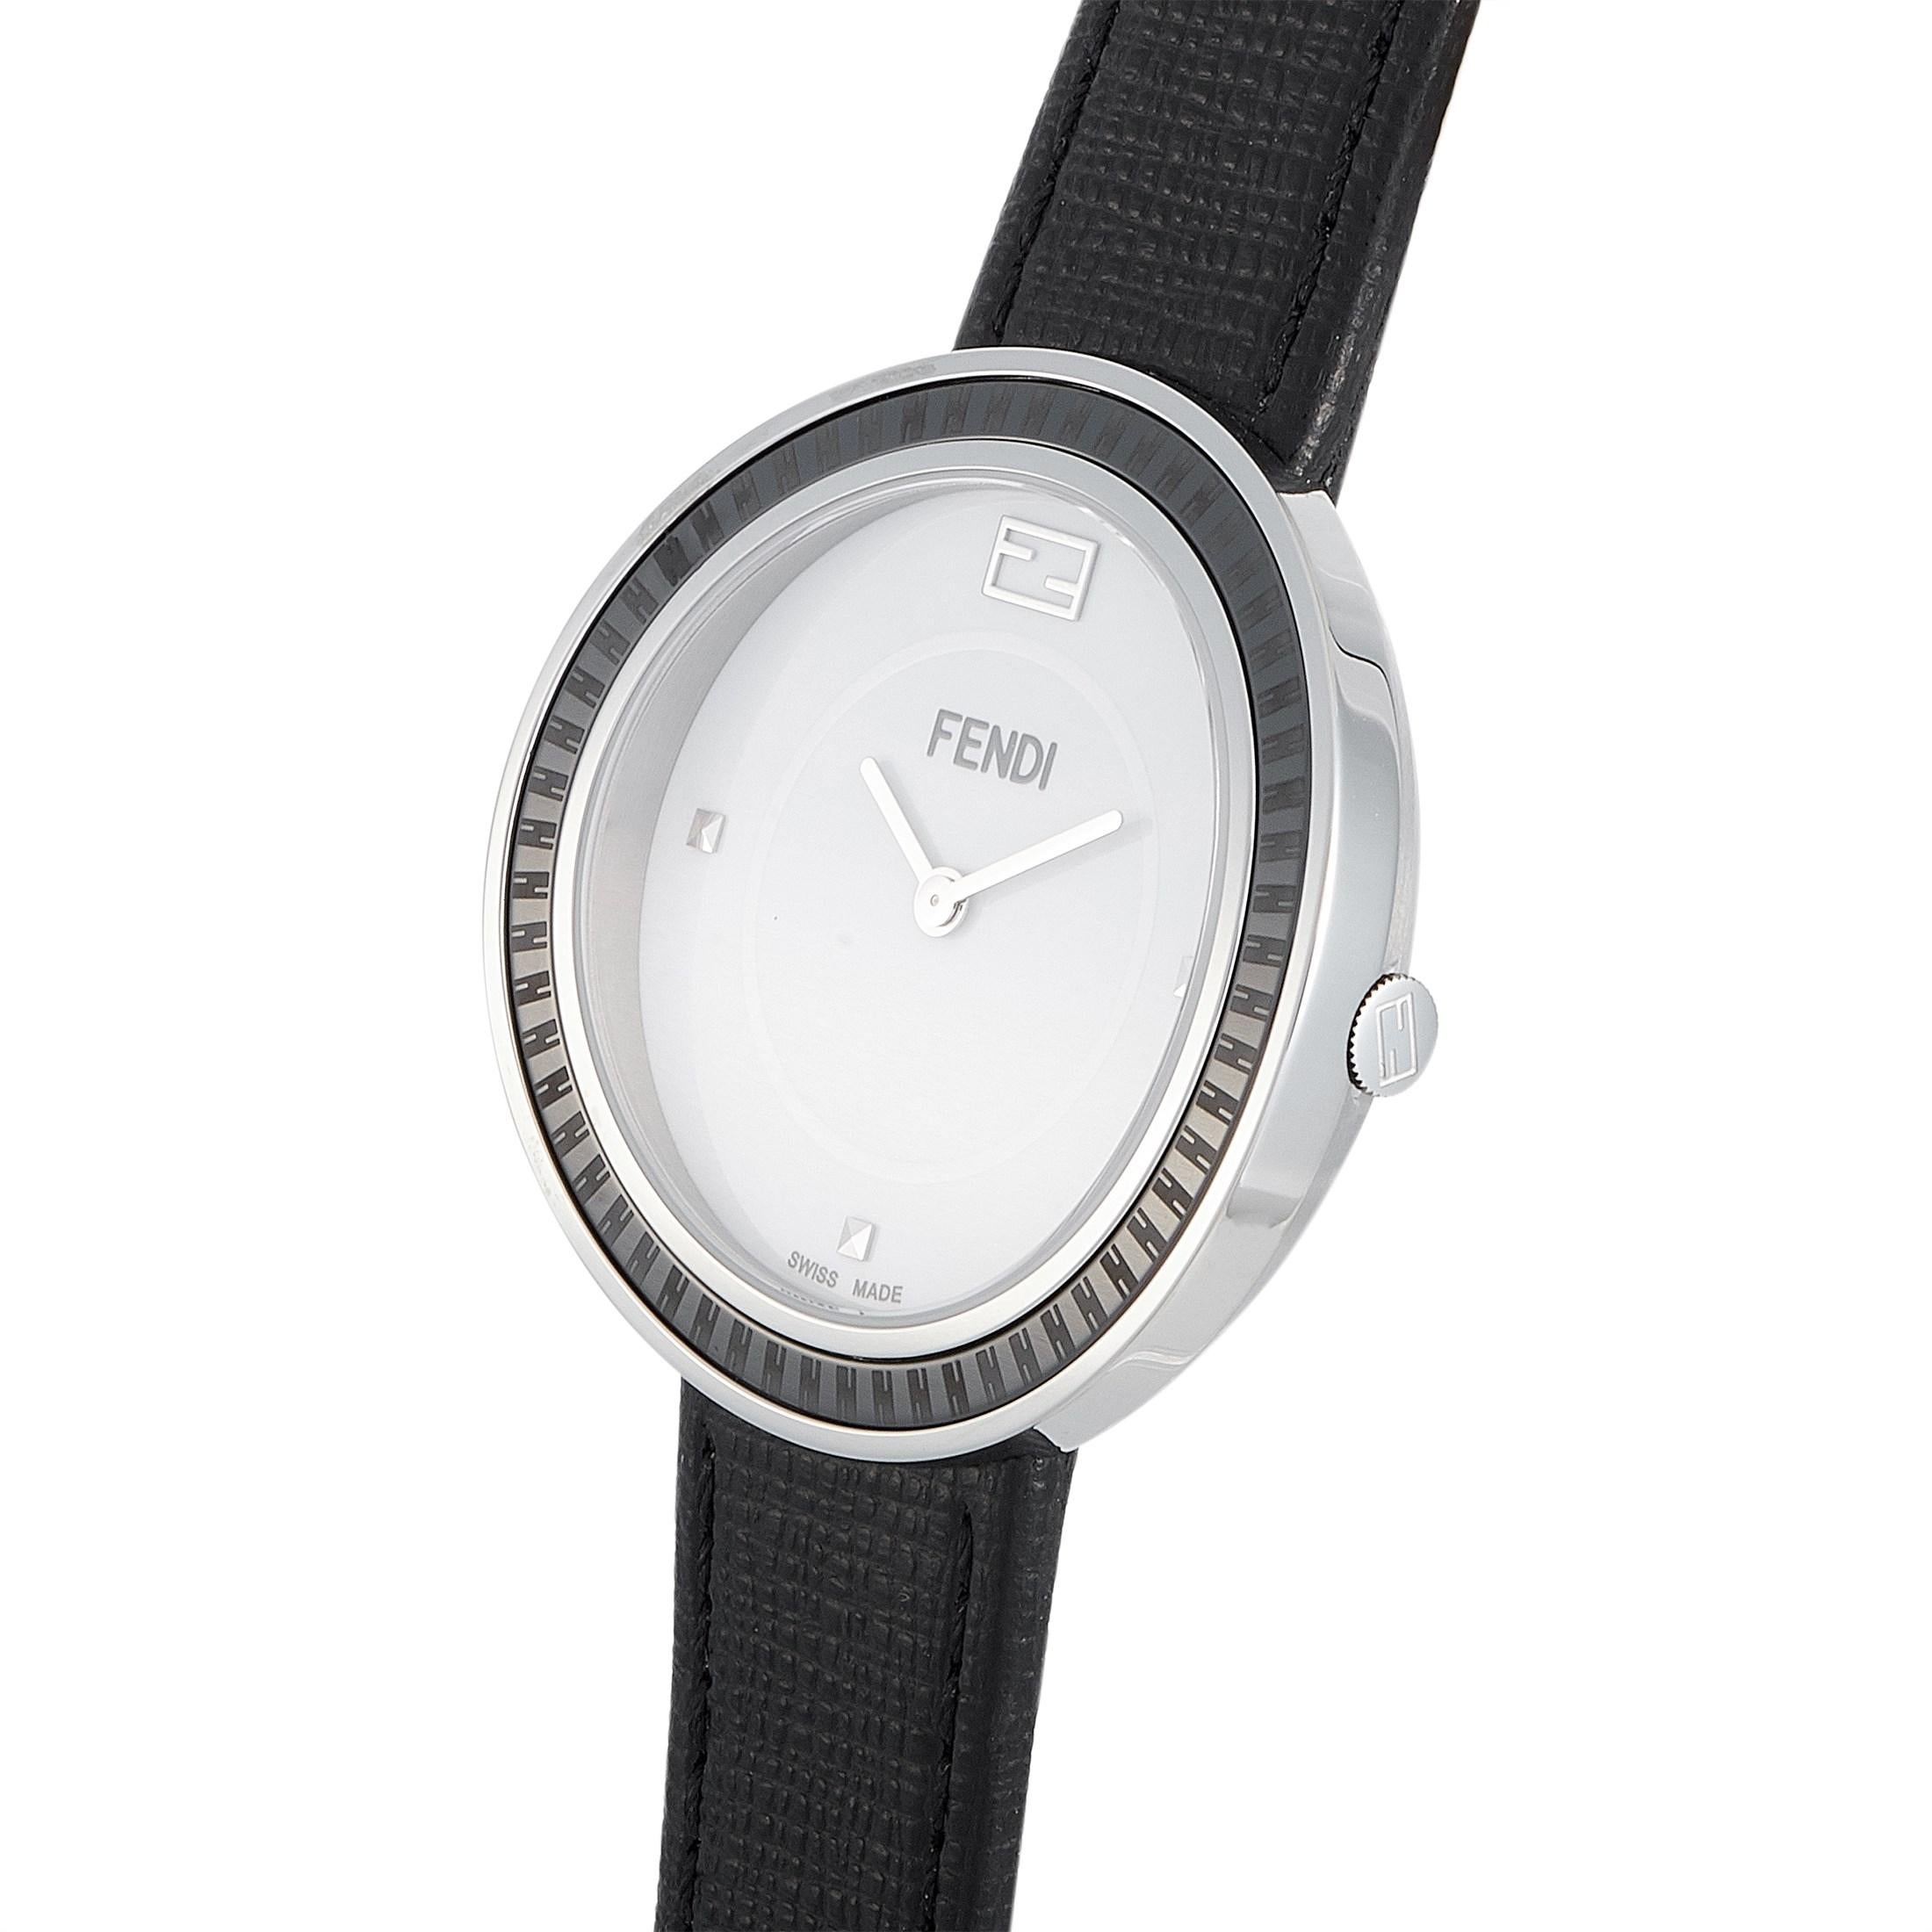 The Fendi My Way watch, reference number F352034011, boasts a 36 mm stainless steel case fitted with a black ceramic bezel. The case is presented on a black leather strap, secured on the wrist with a tang buckle. This model is powered by a quartz